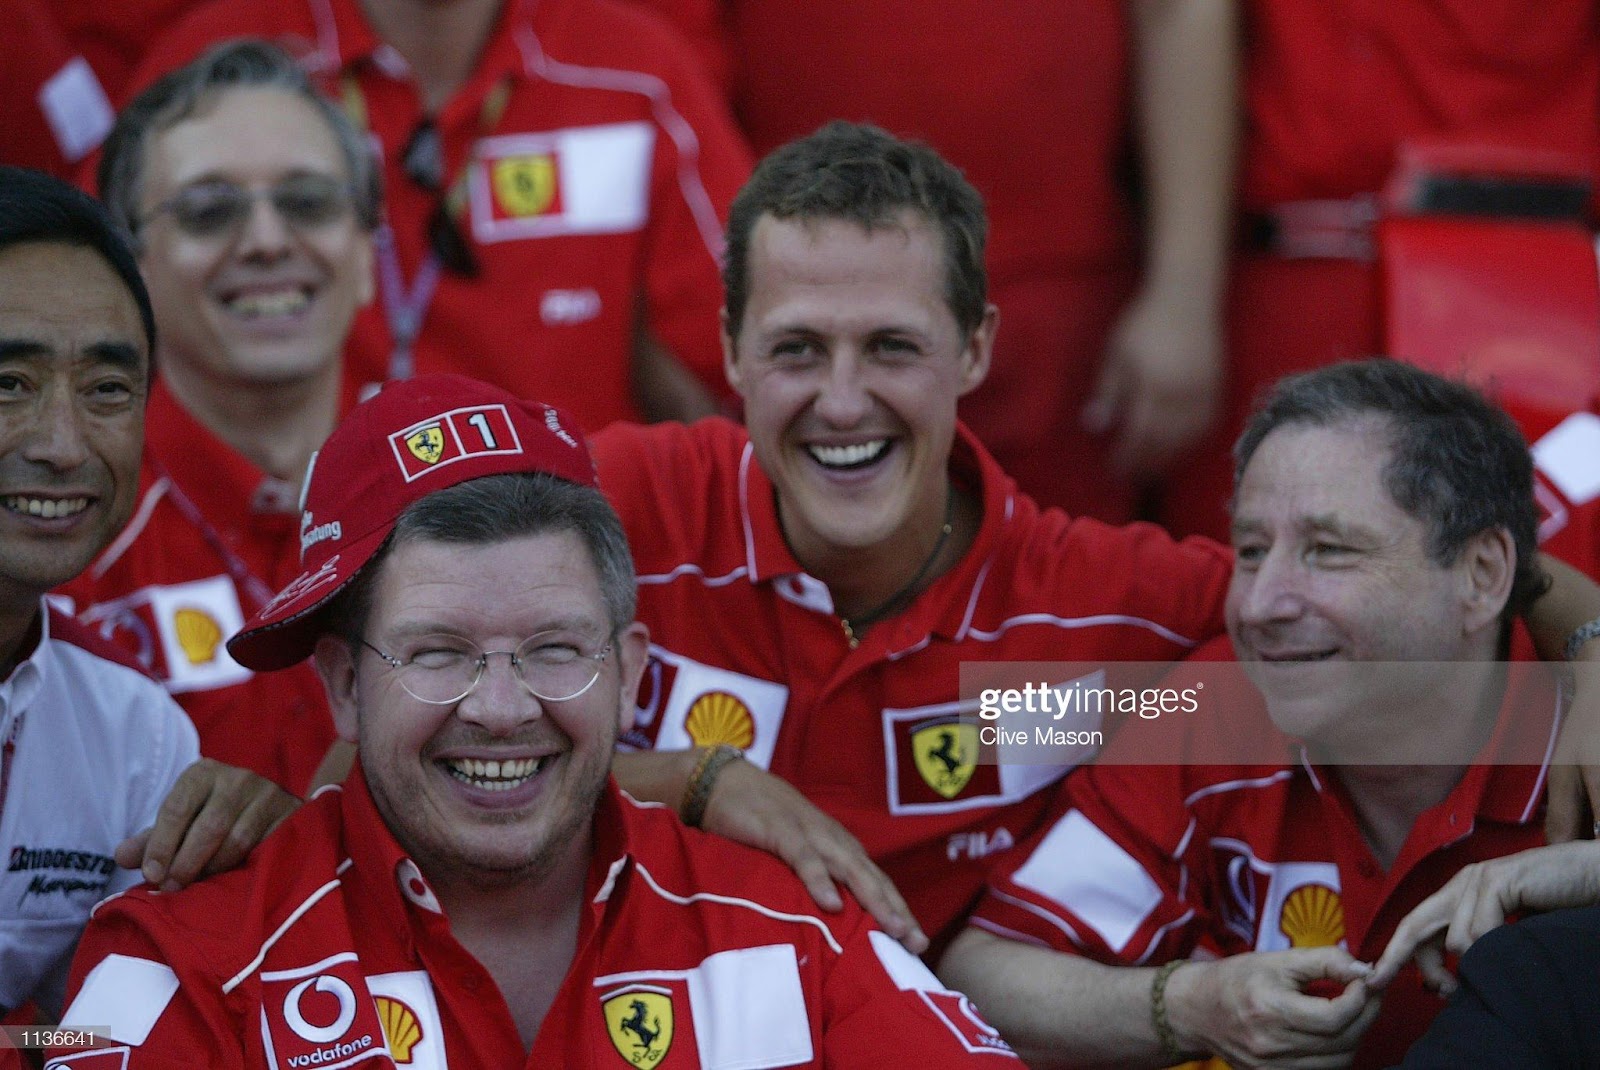 Ross Brawn (left) tries on the new World Champion Michael Schumacher's (center) cap while Jean Todt (right) looks on during a team photo to celebrate the German’s title at the F1 French Grand Prix at Nevers Magny-Cours Circuit, France, on July 21, 2002.